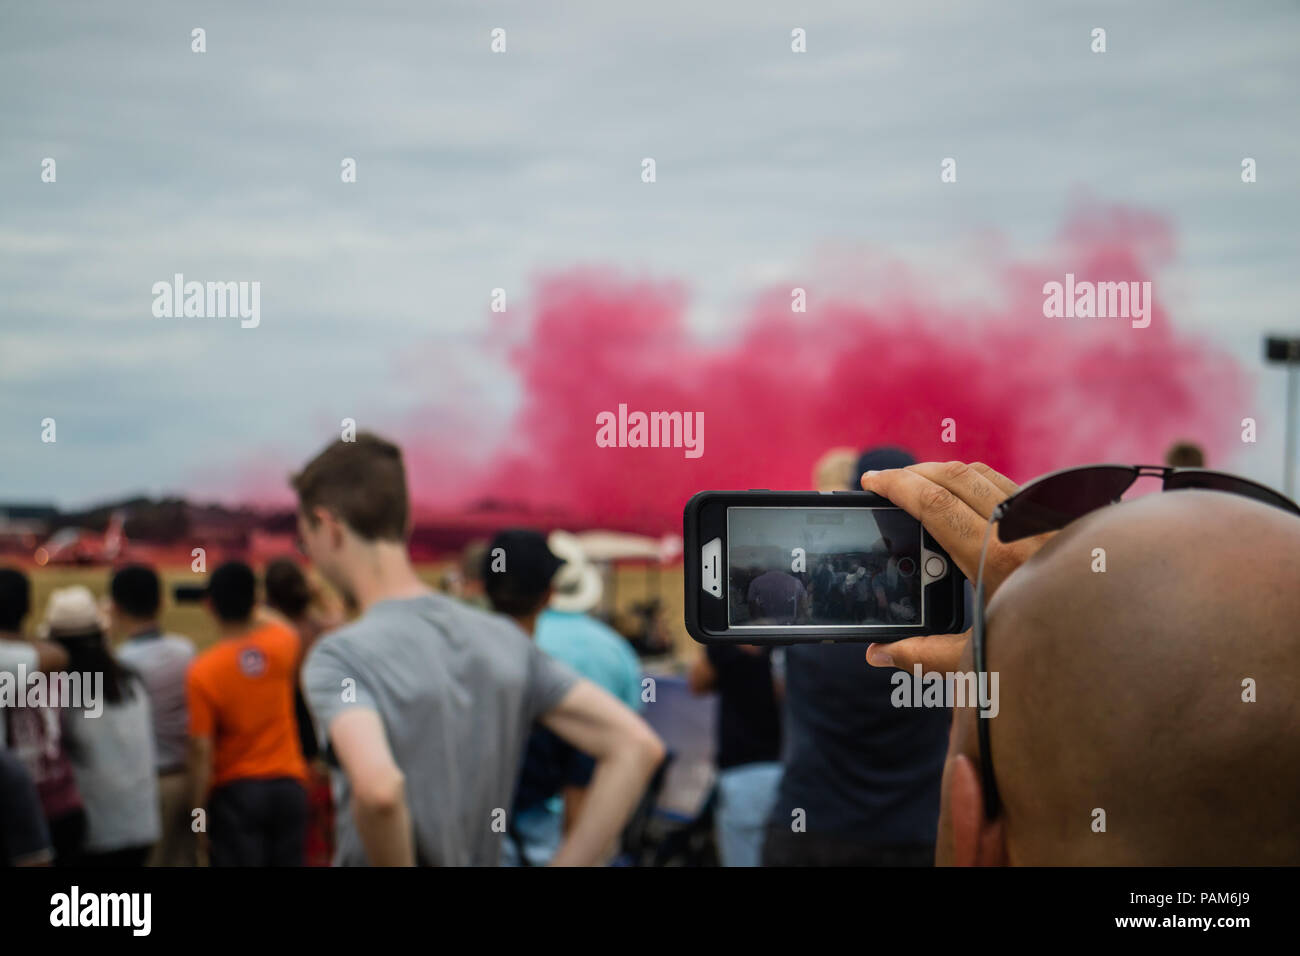 Crowd of people taking pictures of  The Royal Air Force (RAF) Red Arrows aerobatic team at the Farnborough International Airshow 2018. Stock Photo